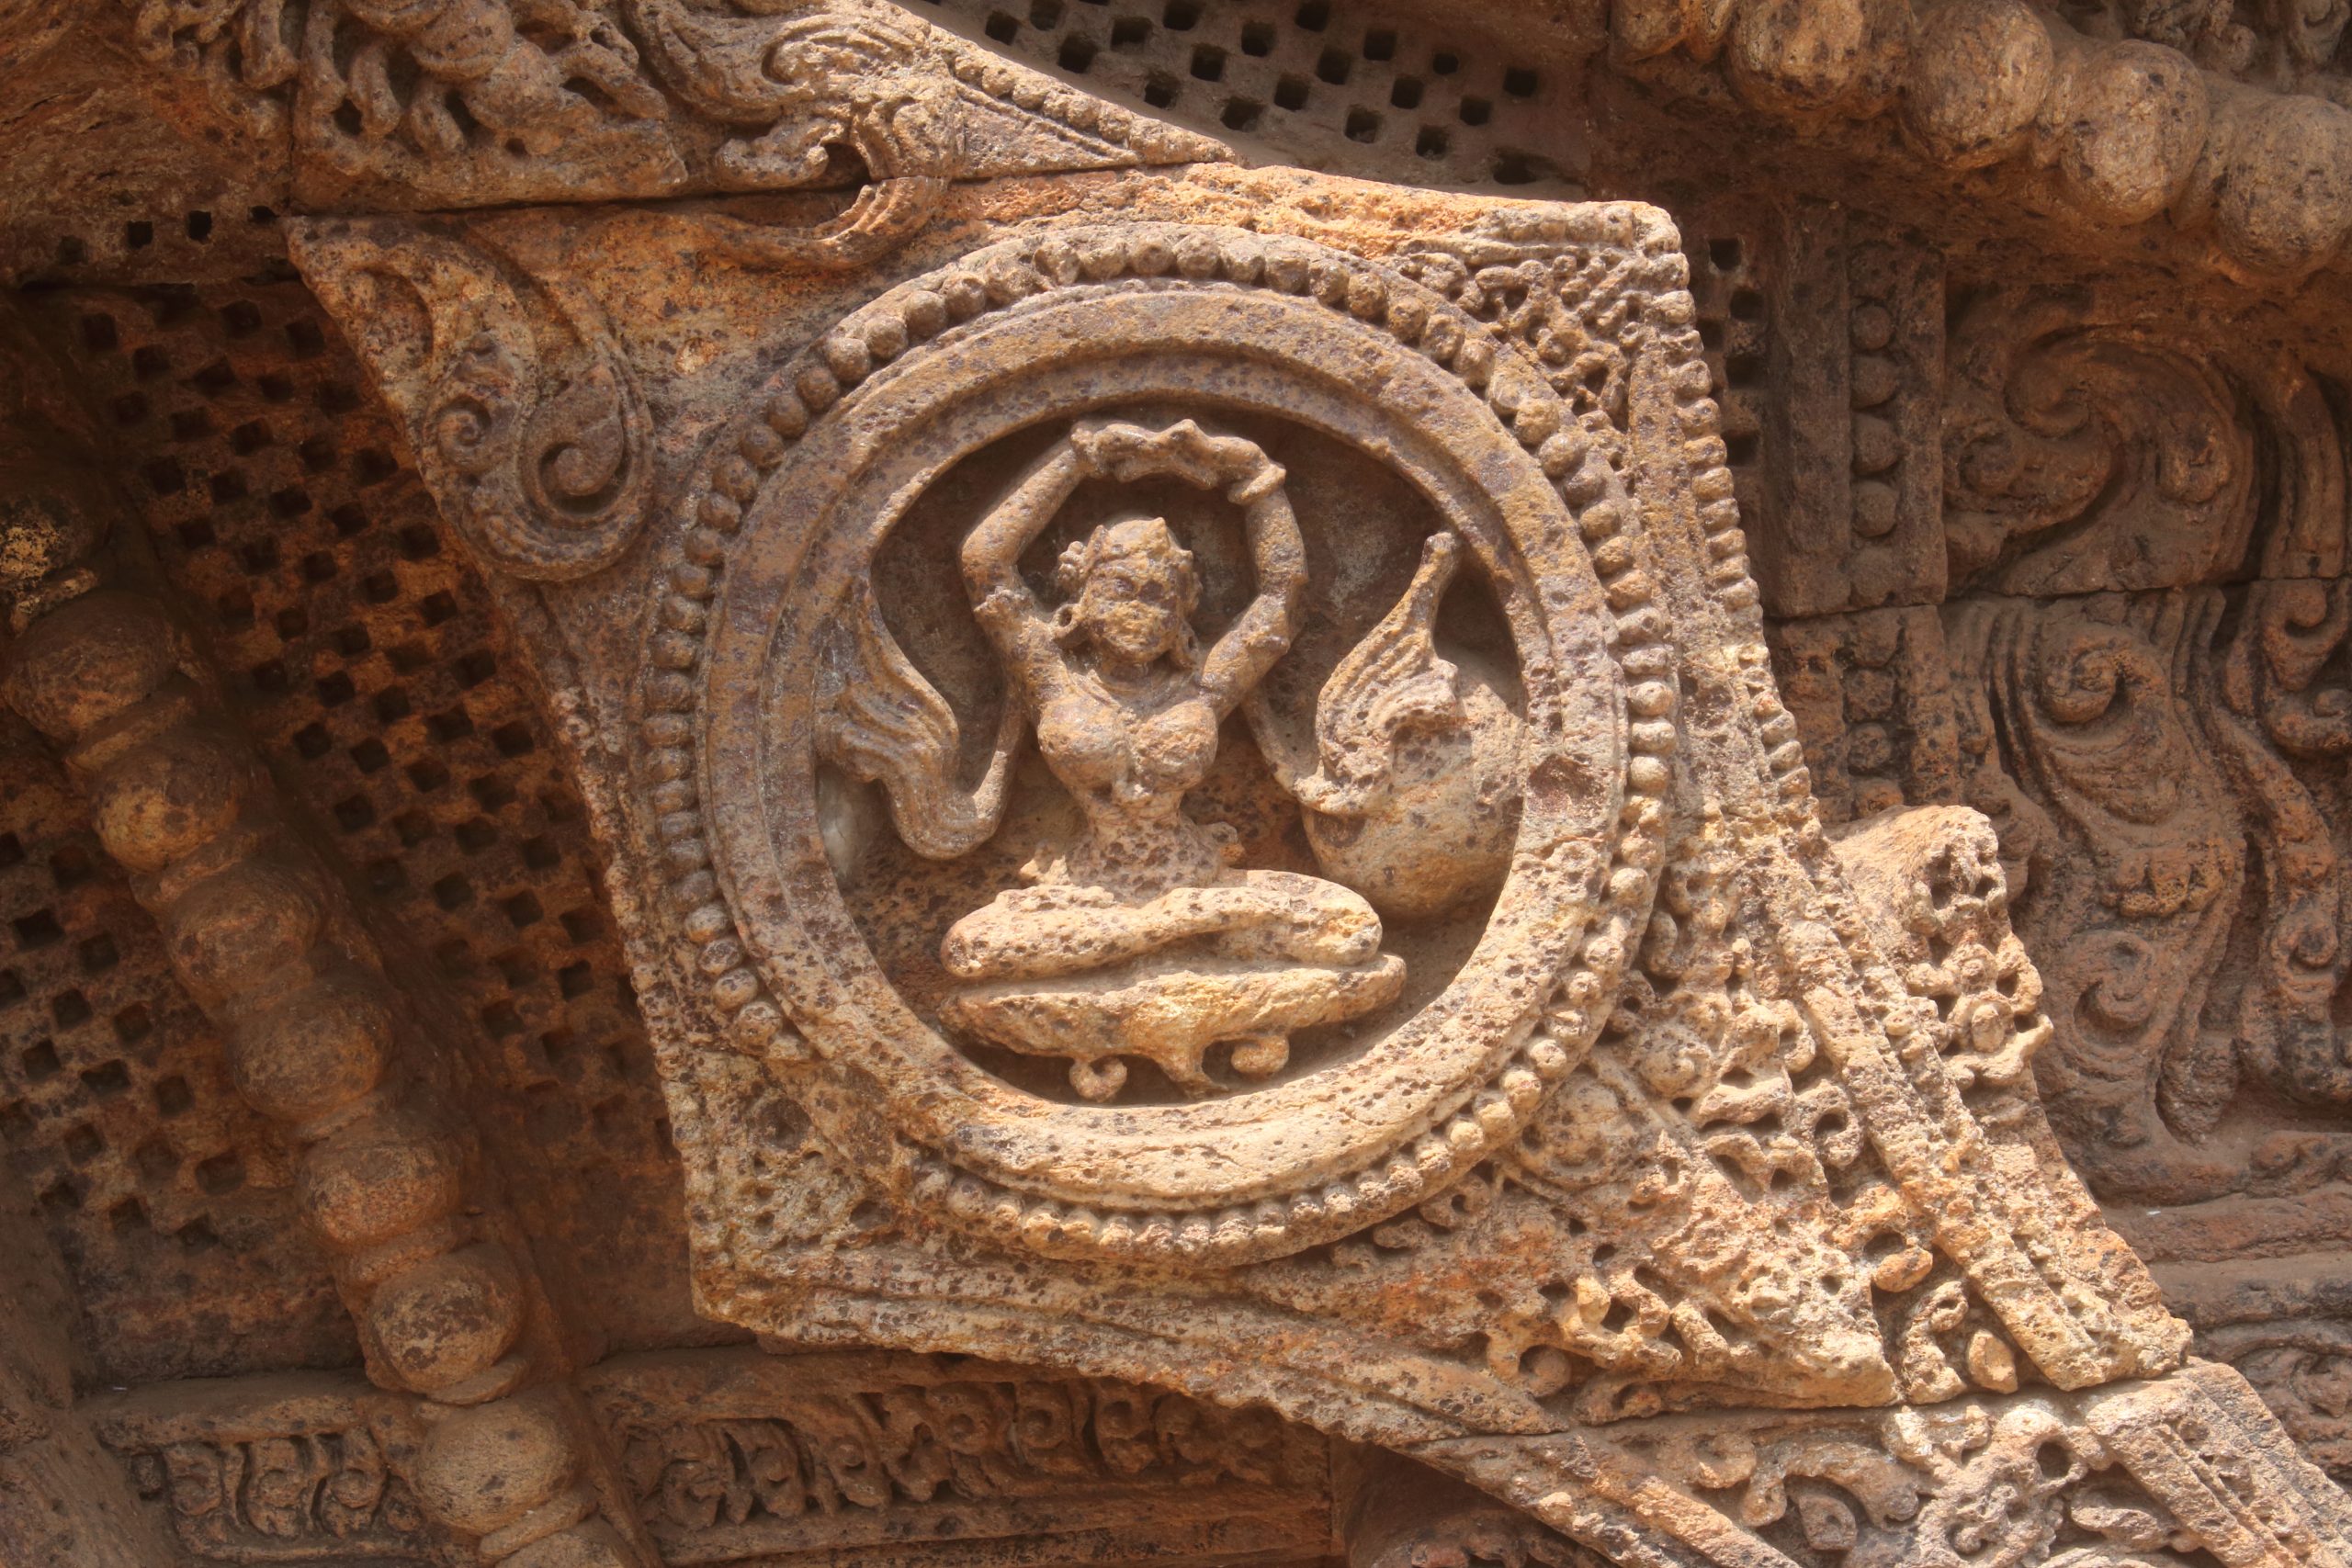 Stone carving at a temple